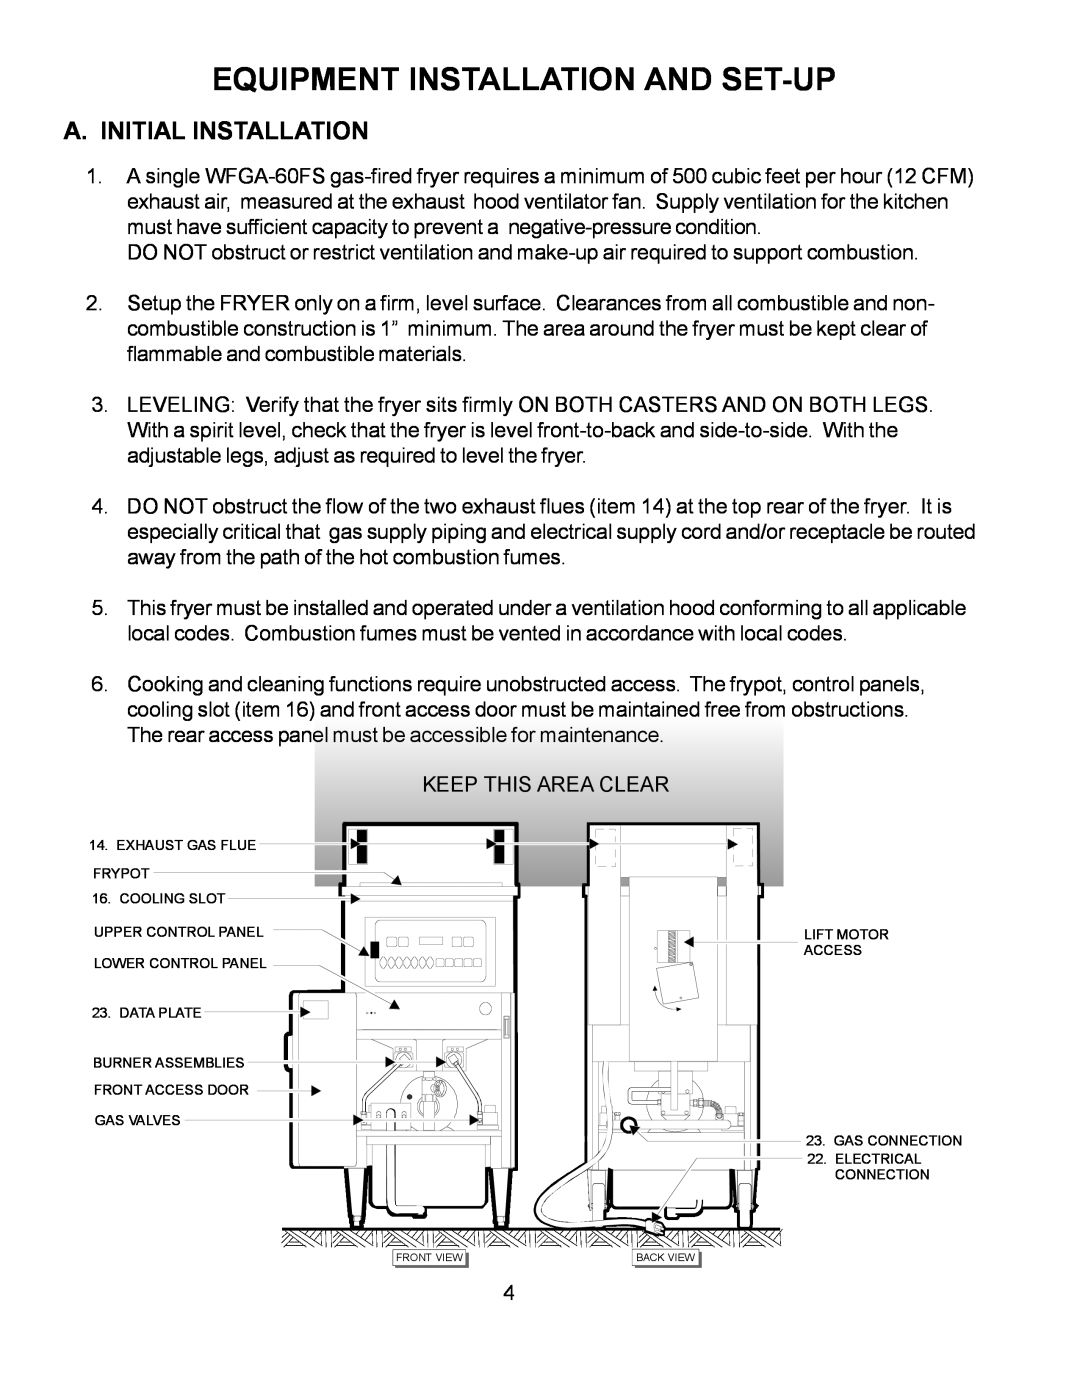 Wells WFGA-60FS service manual Equipment Installation And Set-Up, A. Initial Installation 